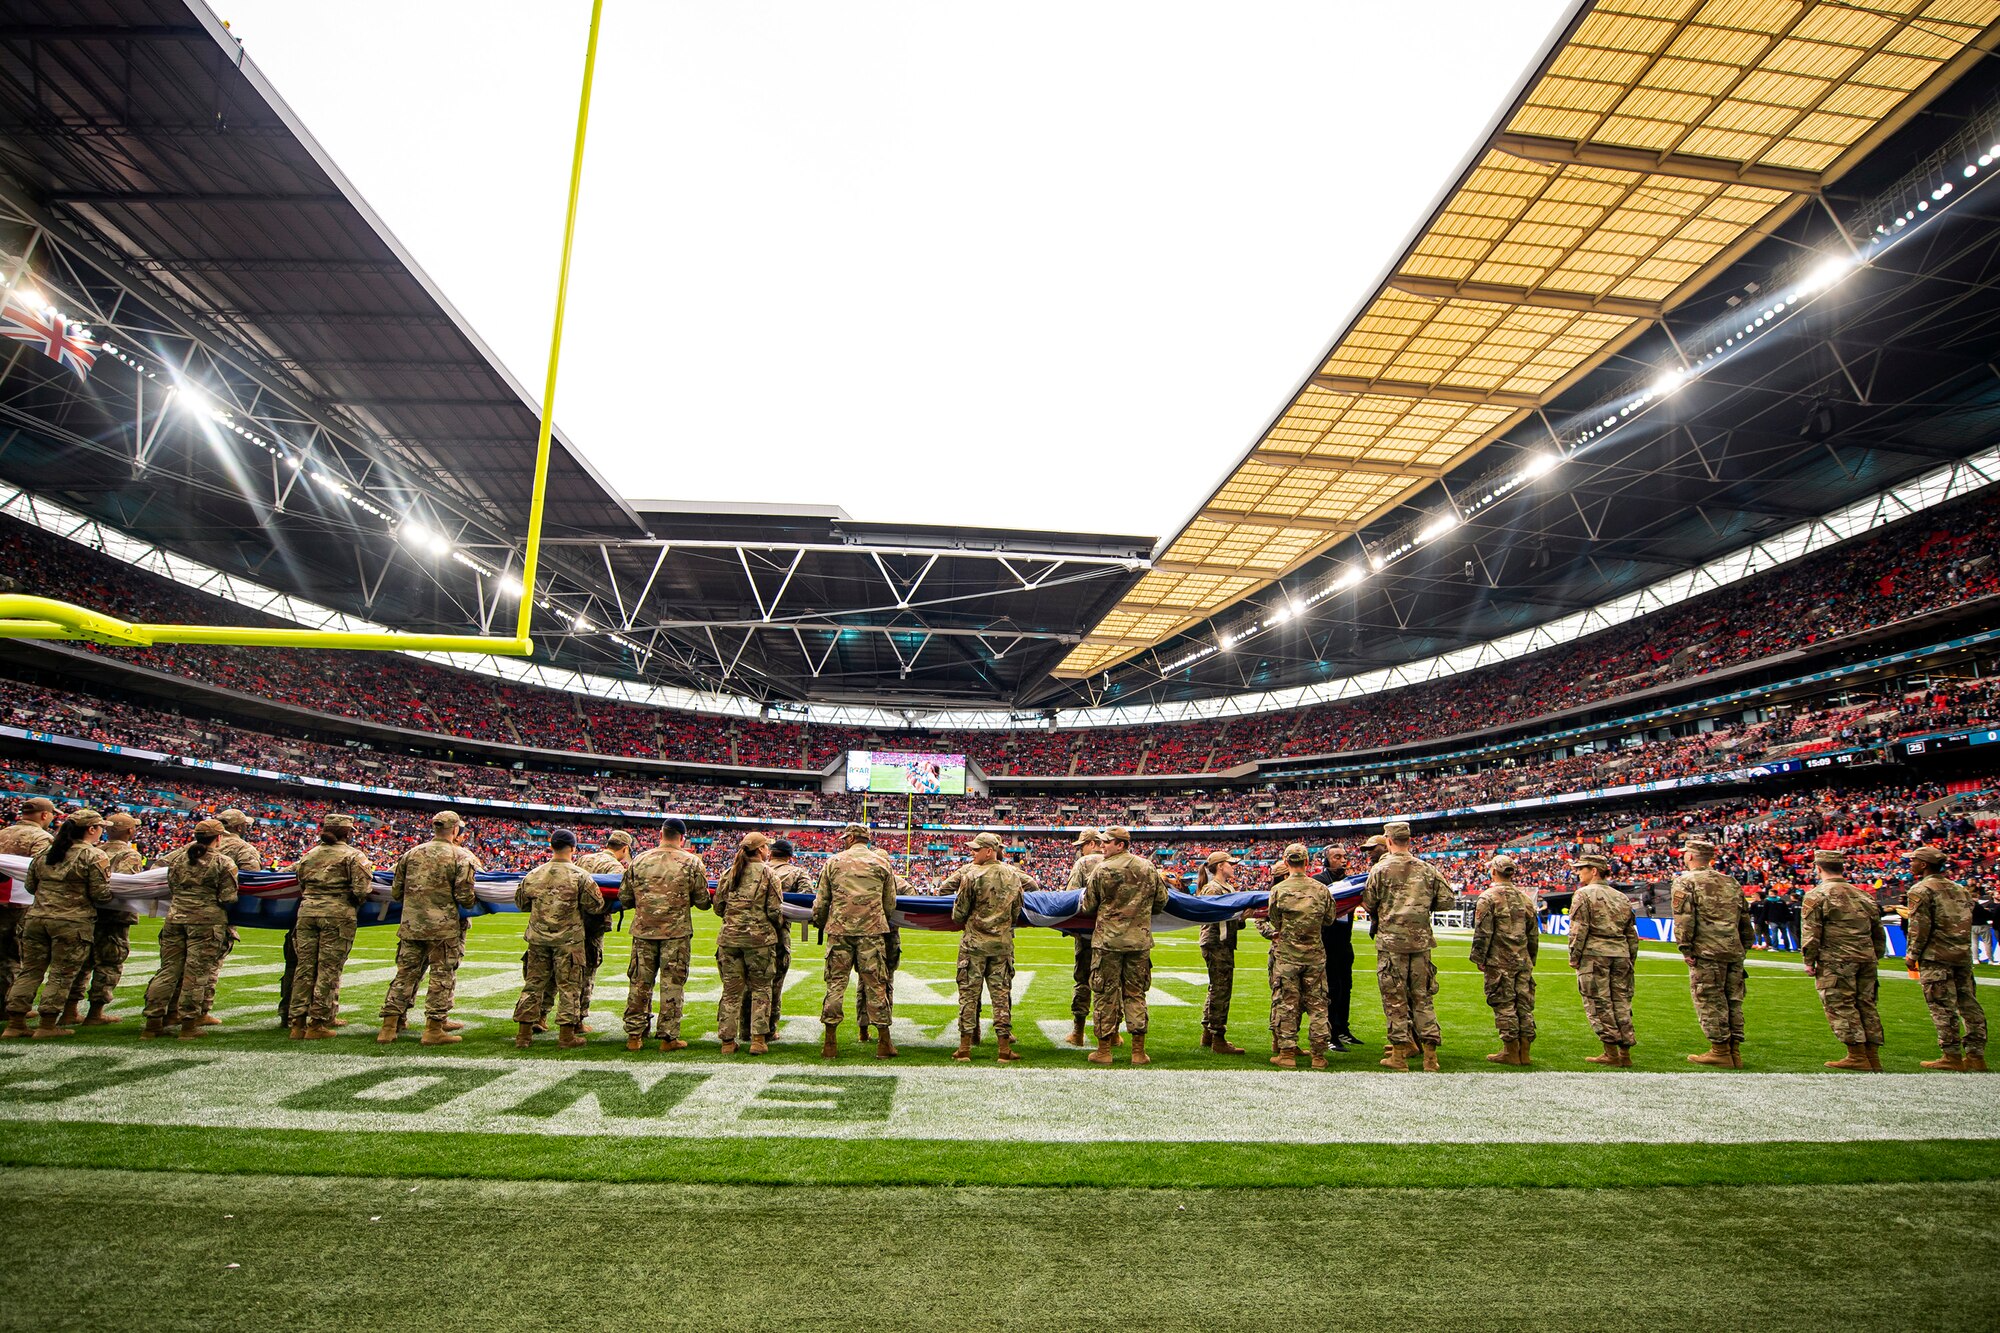 Airmen from the 501st Combat Support Wing hold an American flag prior to the national anthem at Wembley Stadium, in London, England, Oct. 30, 2022. Approximately 70 uniformed personnel represented the U.S. Air Force and nation by unveiling an American flag during the pre-game ceremonies of the Jacksonville Jaguars and Denver Broncos NFL game. (U.S. Air Force photo by Staff Sgt. Eugene Oliver)